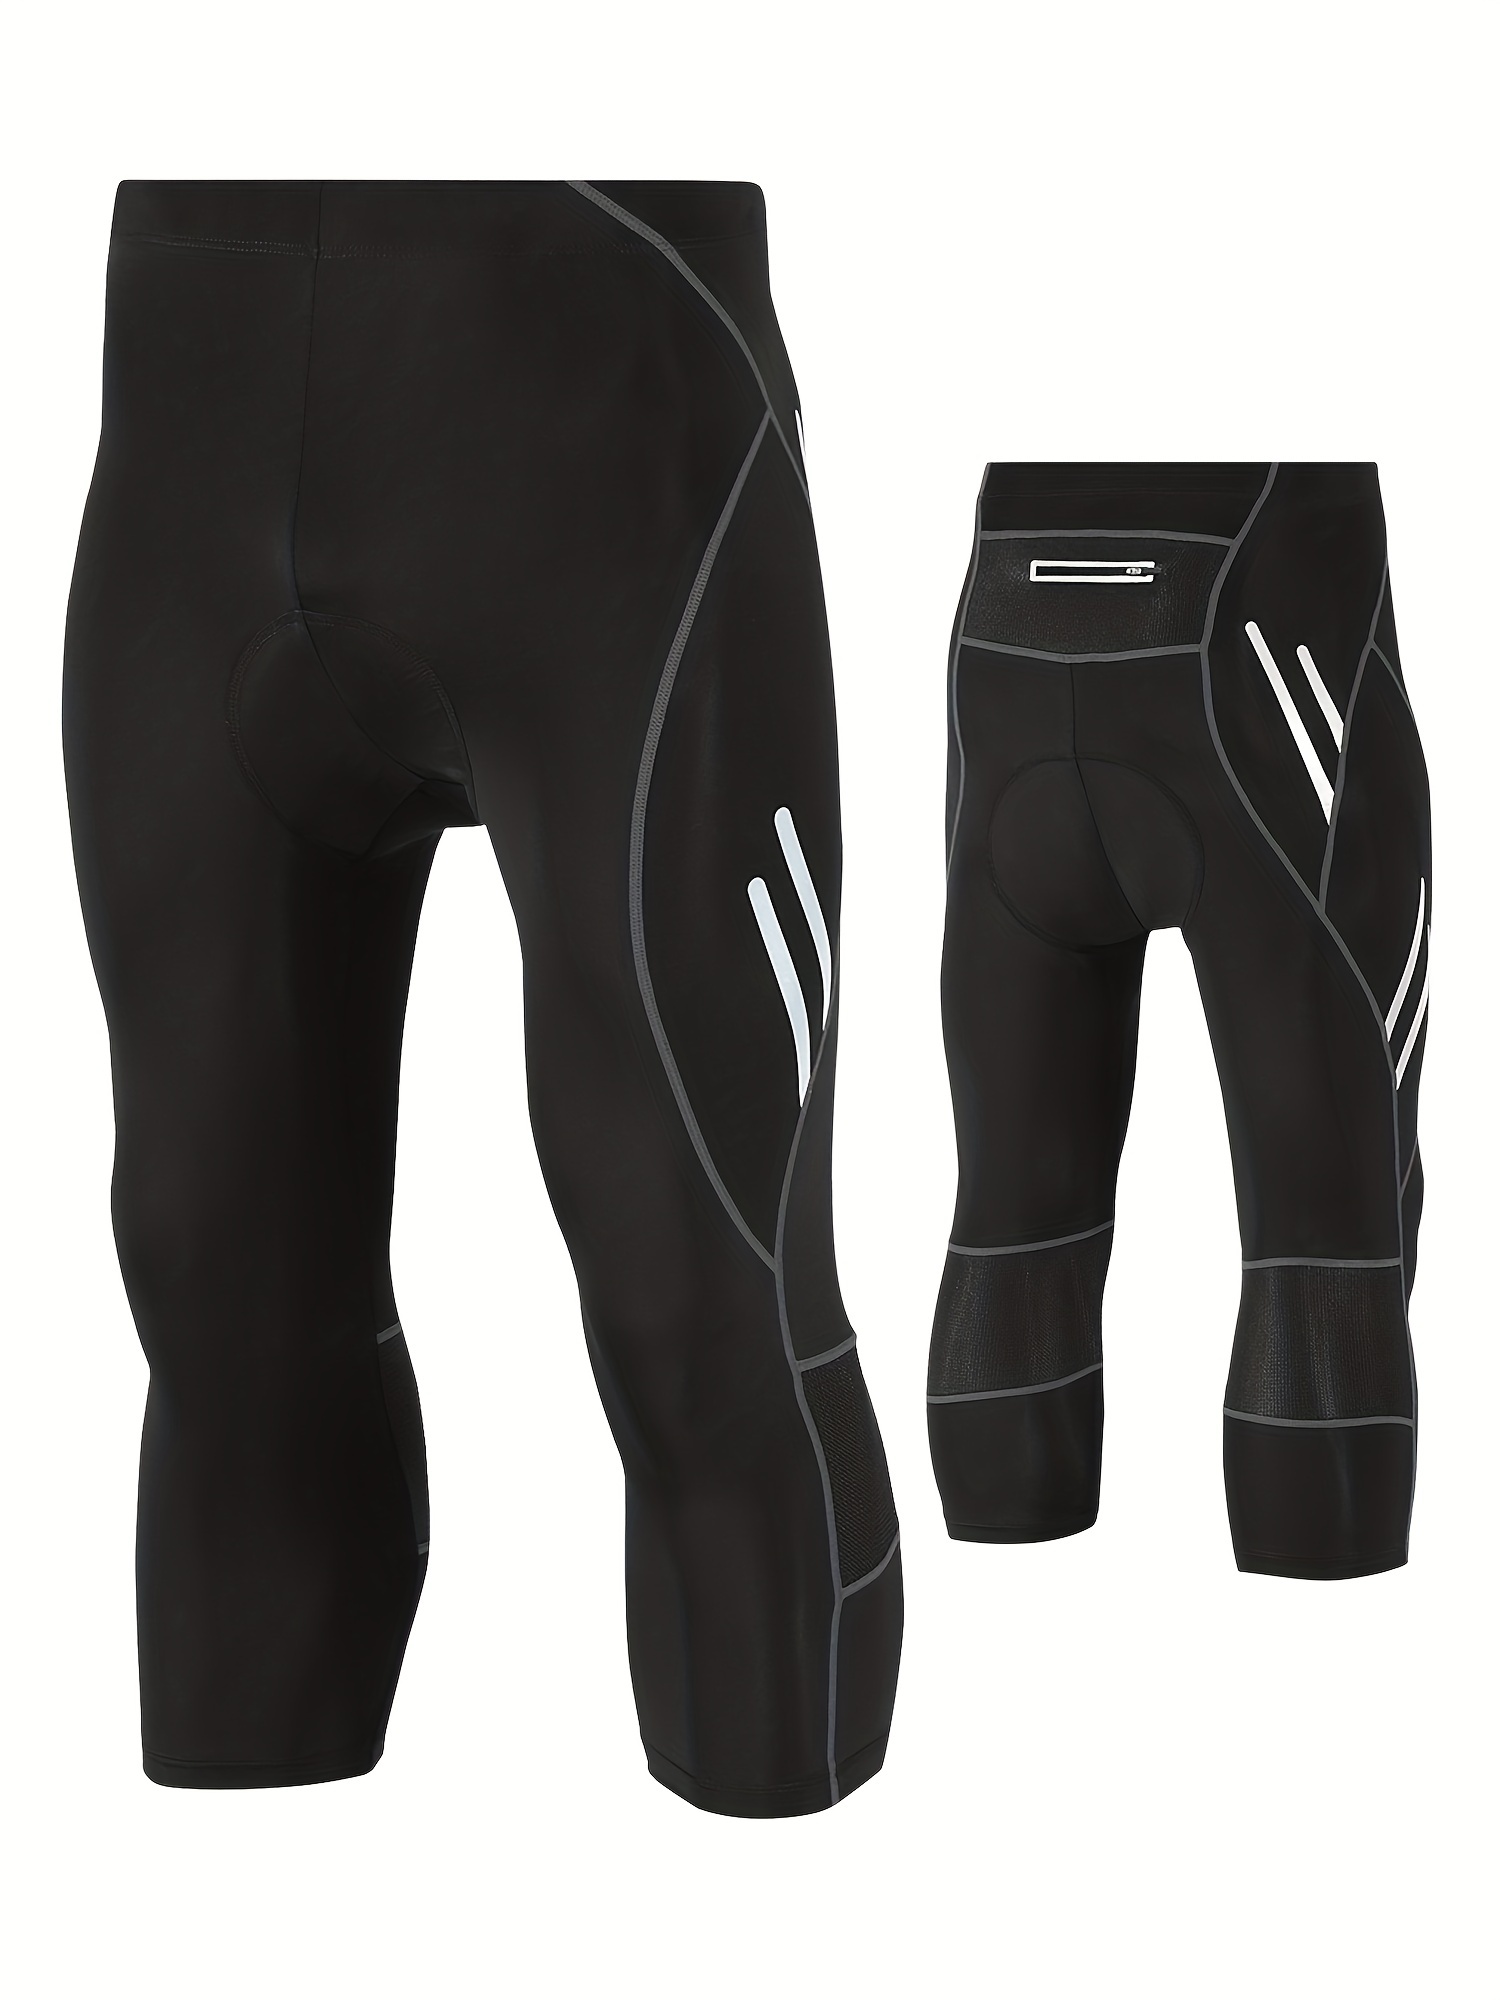 Men's Reflective Bicycle Pant Gel Padded Cycling Compression